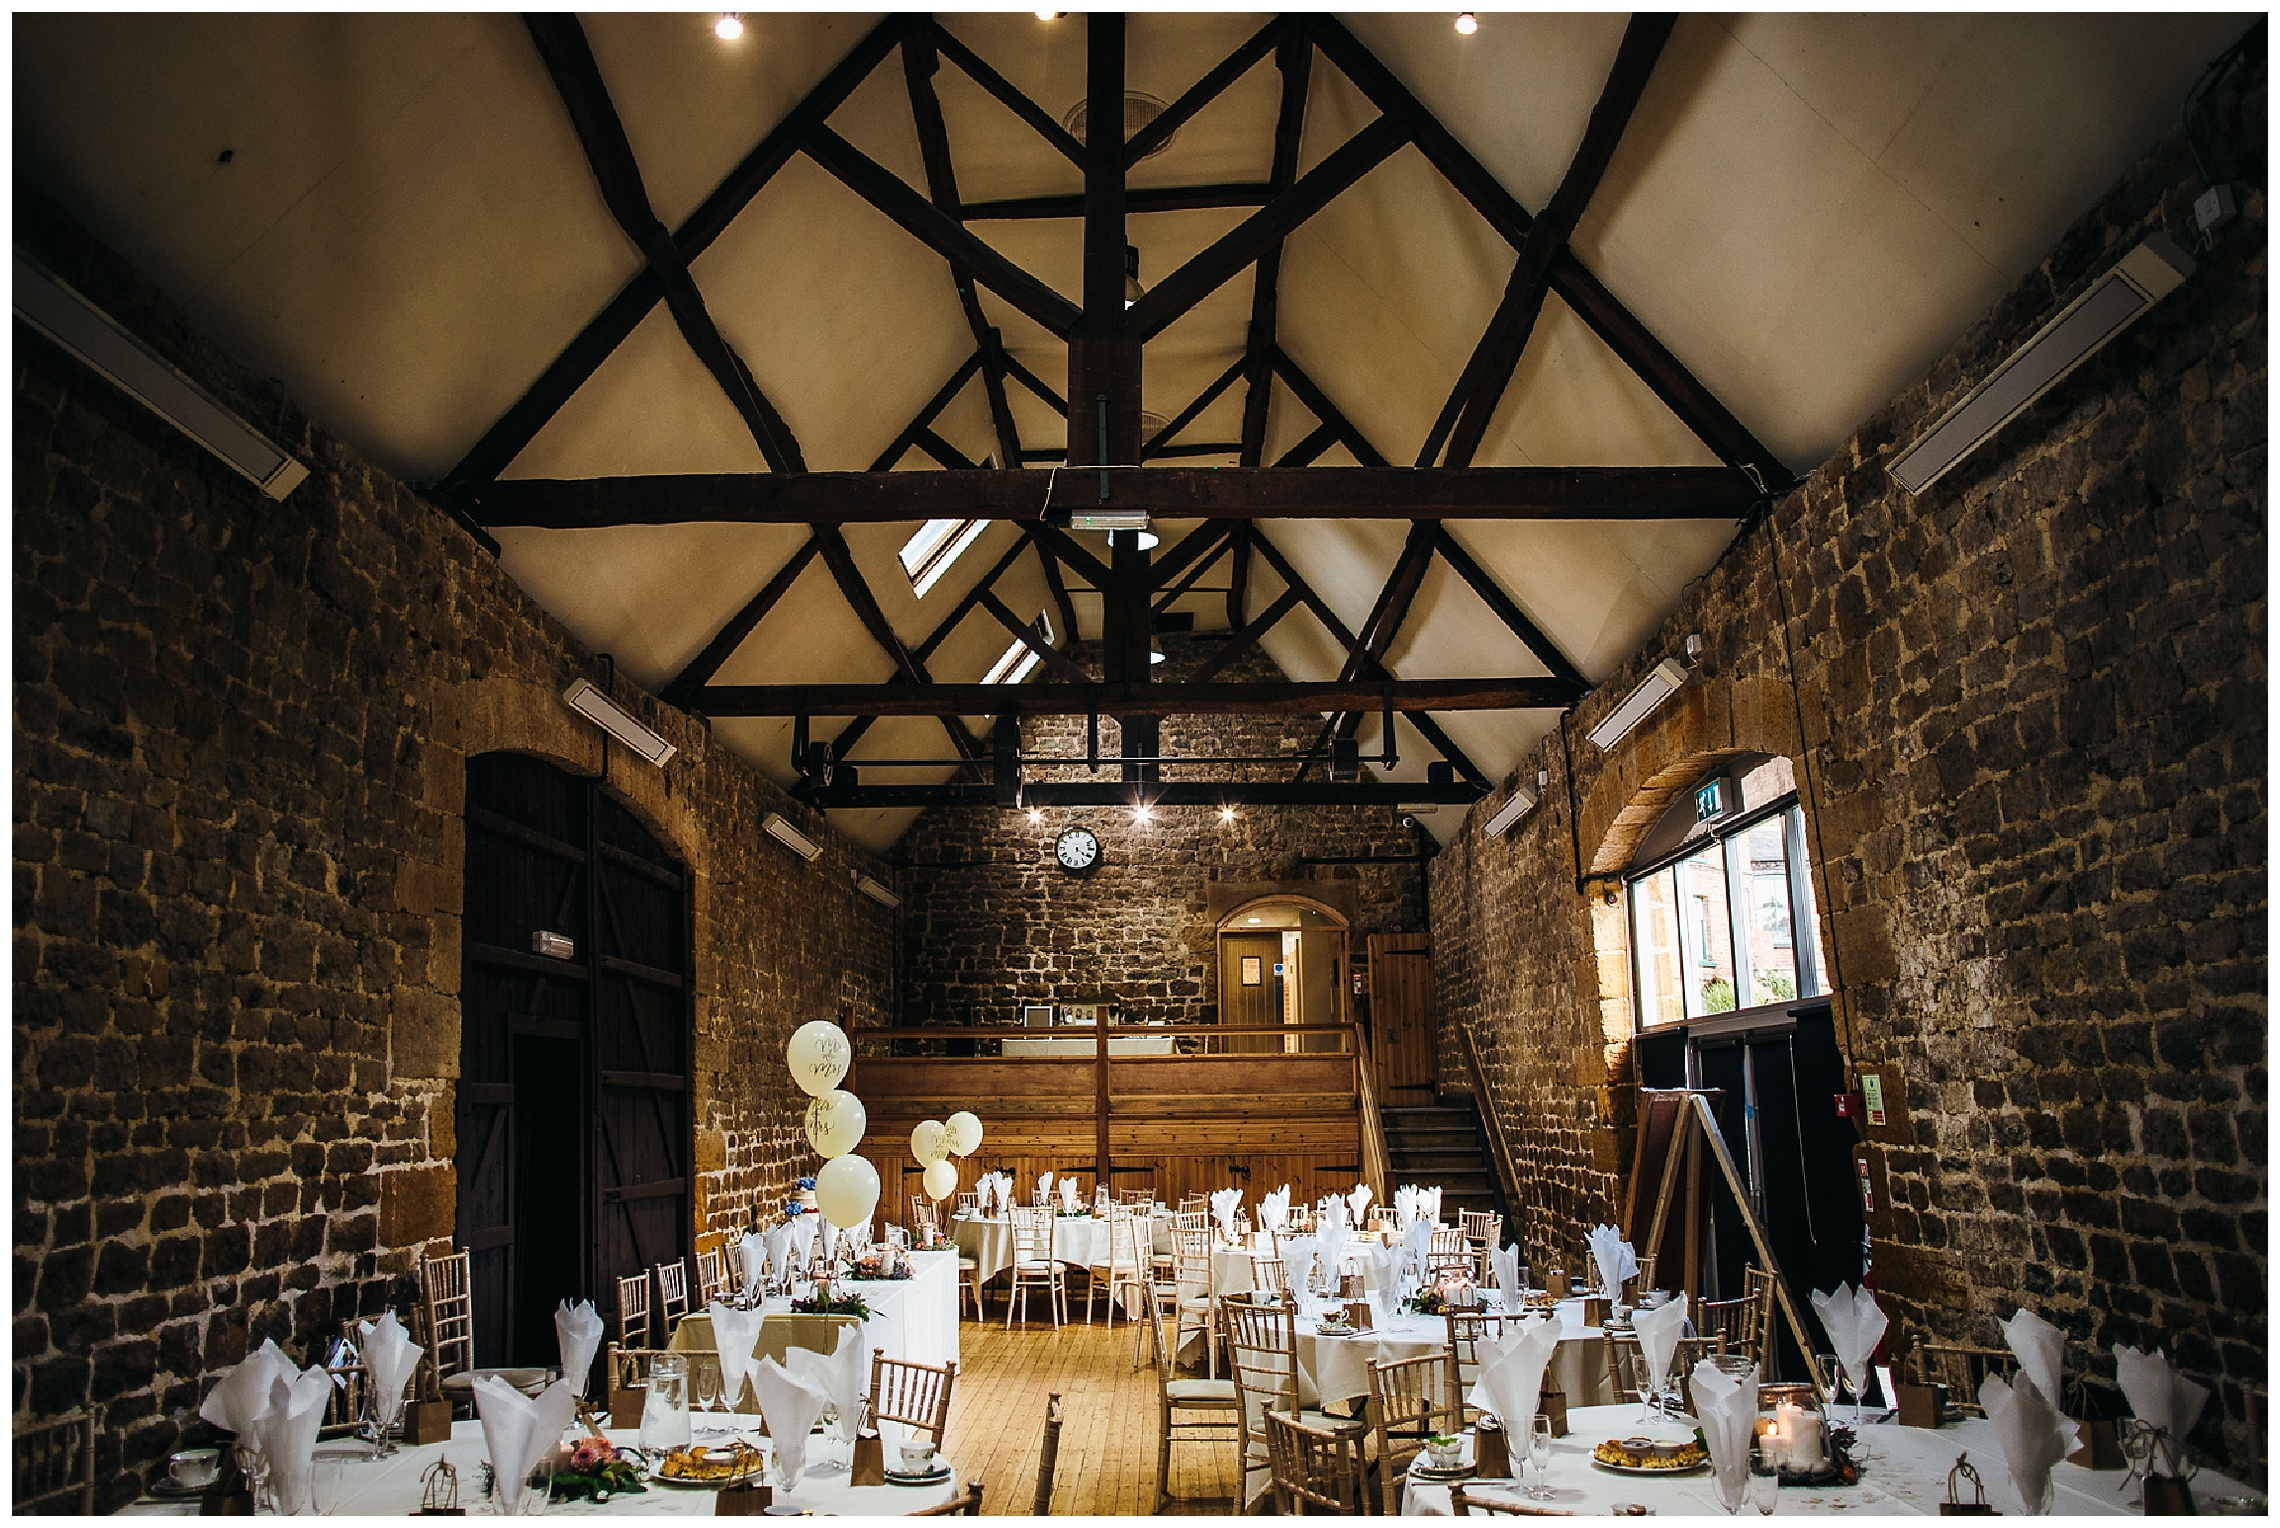 rustic wedding venue with wooden beams and brick walls, white tables and floral centrepieces